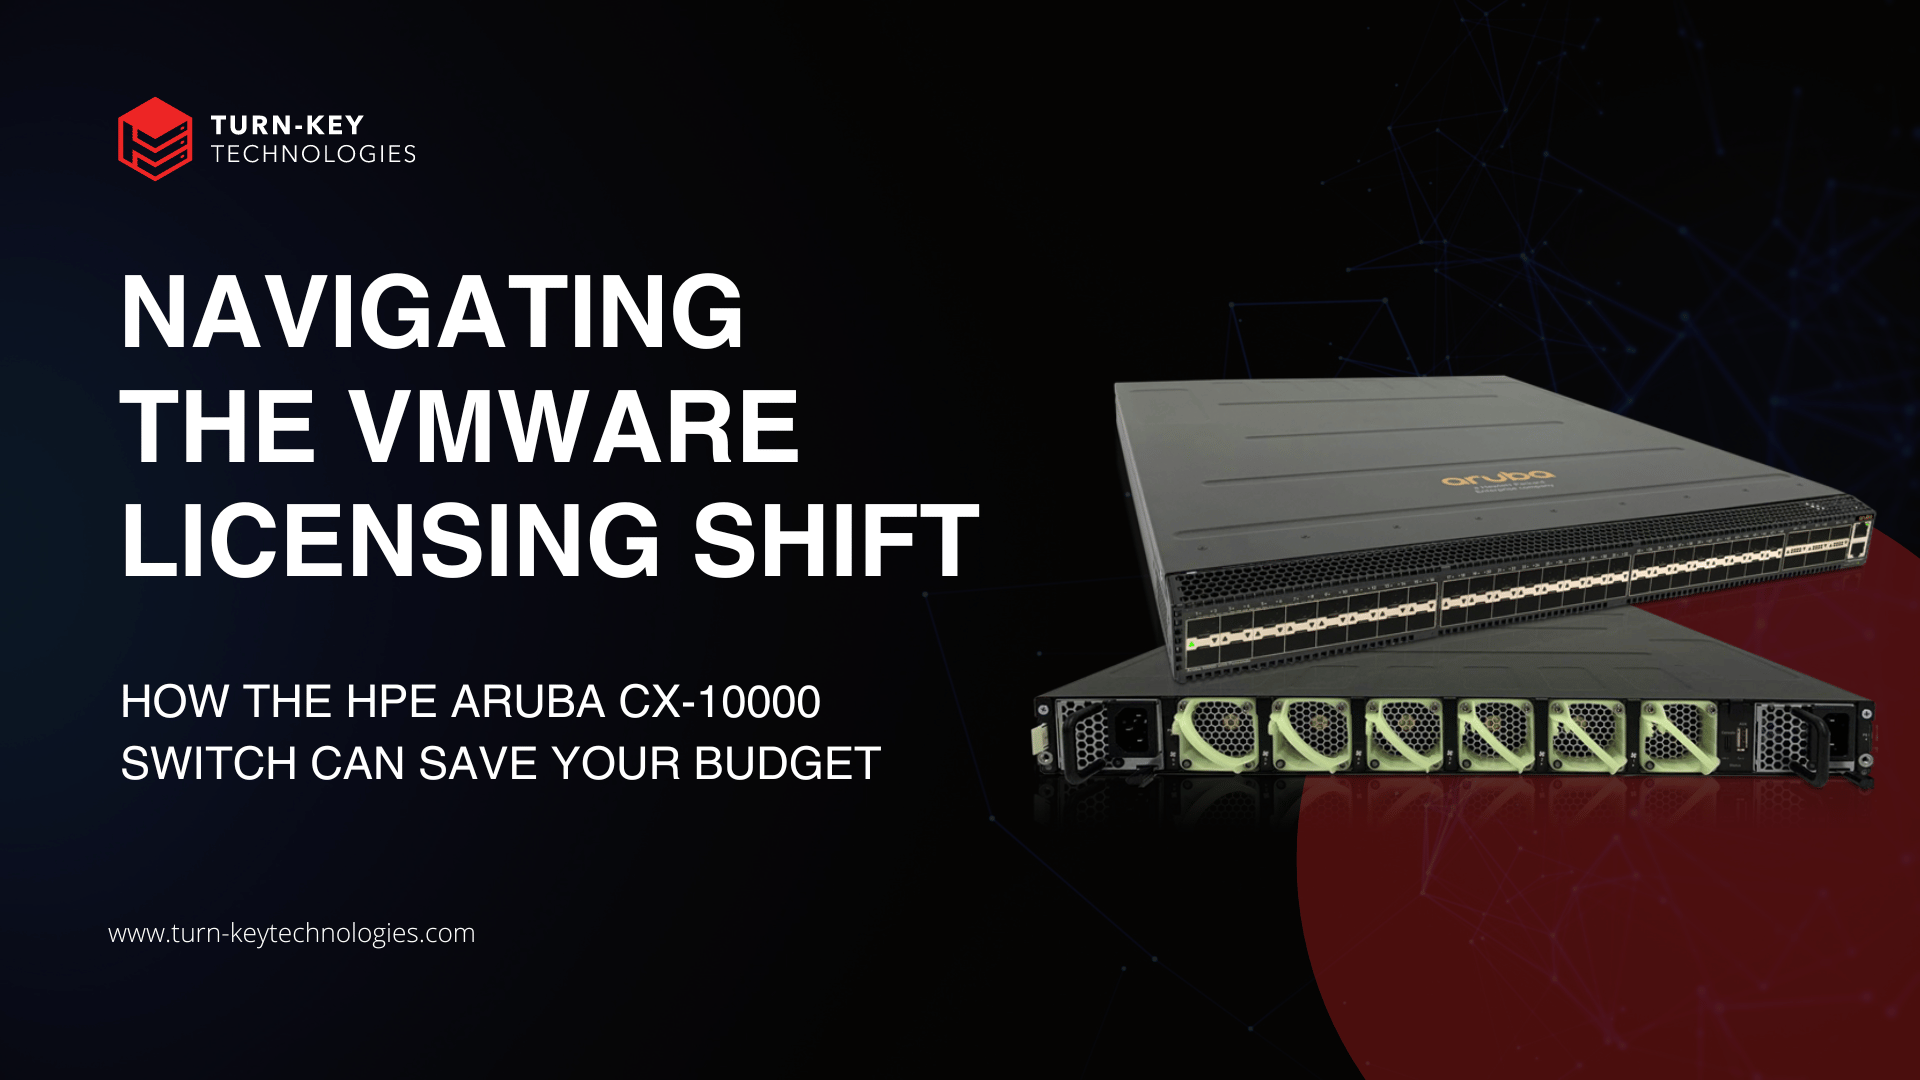 HOW THE HPE ARUBA CX-10000 SWITCH CAN SAVE YOUR VMWARE SOFTWARE BUDGET